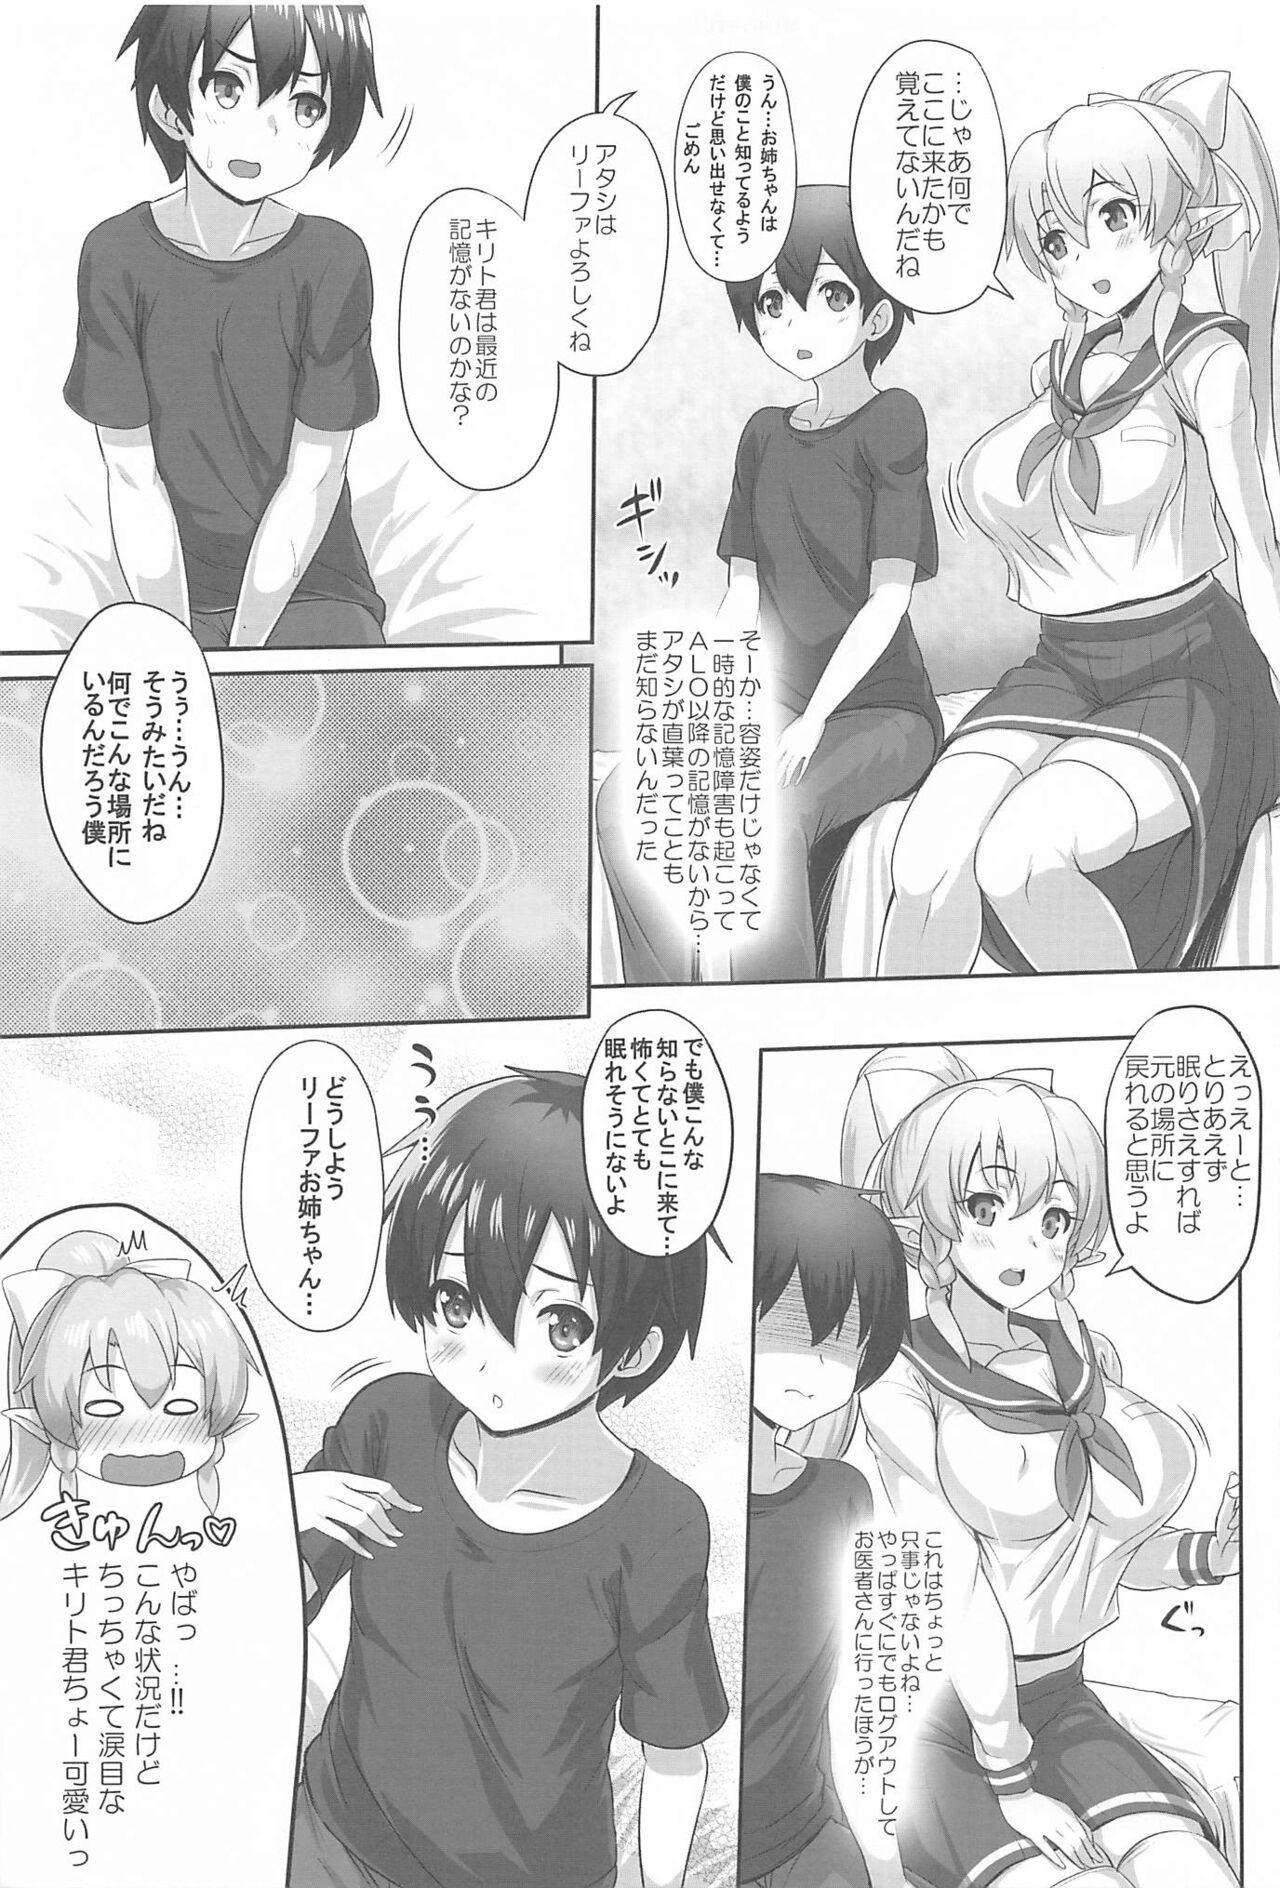 Pounded Sister Affection On&Off 3 SAO Soushuuhen - Sword art online Beautiful - Page 6